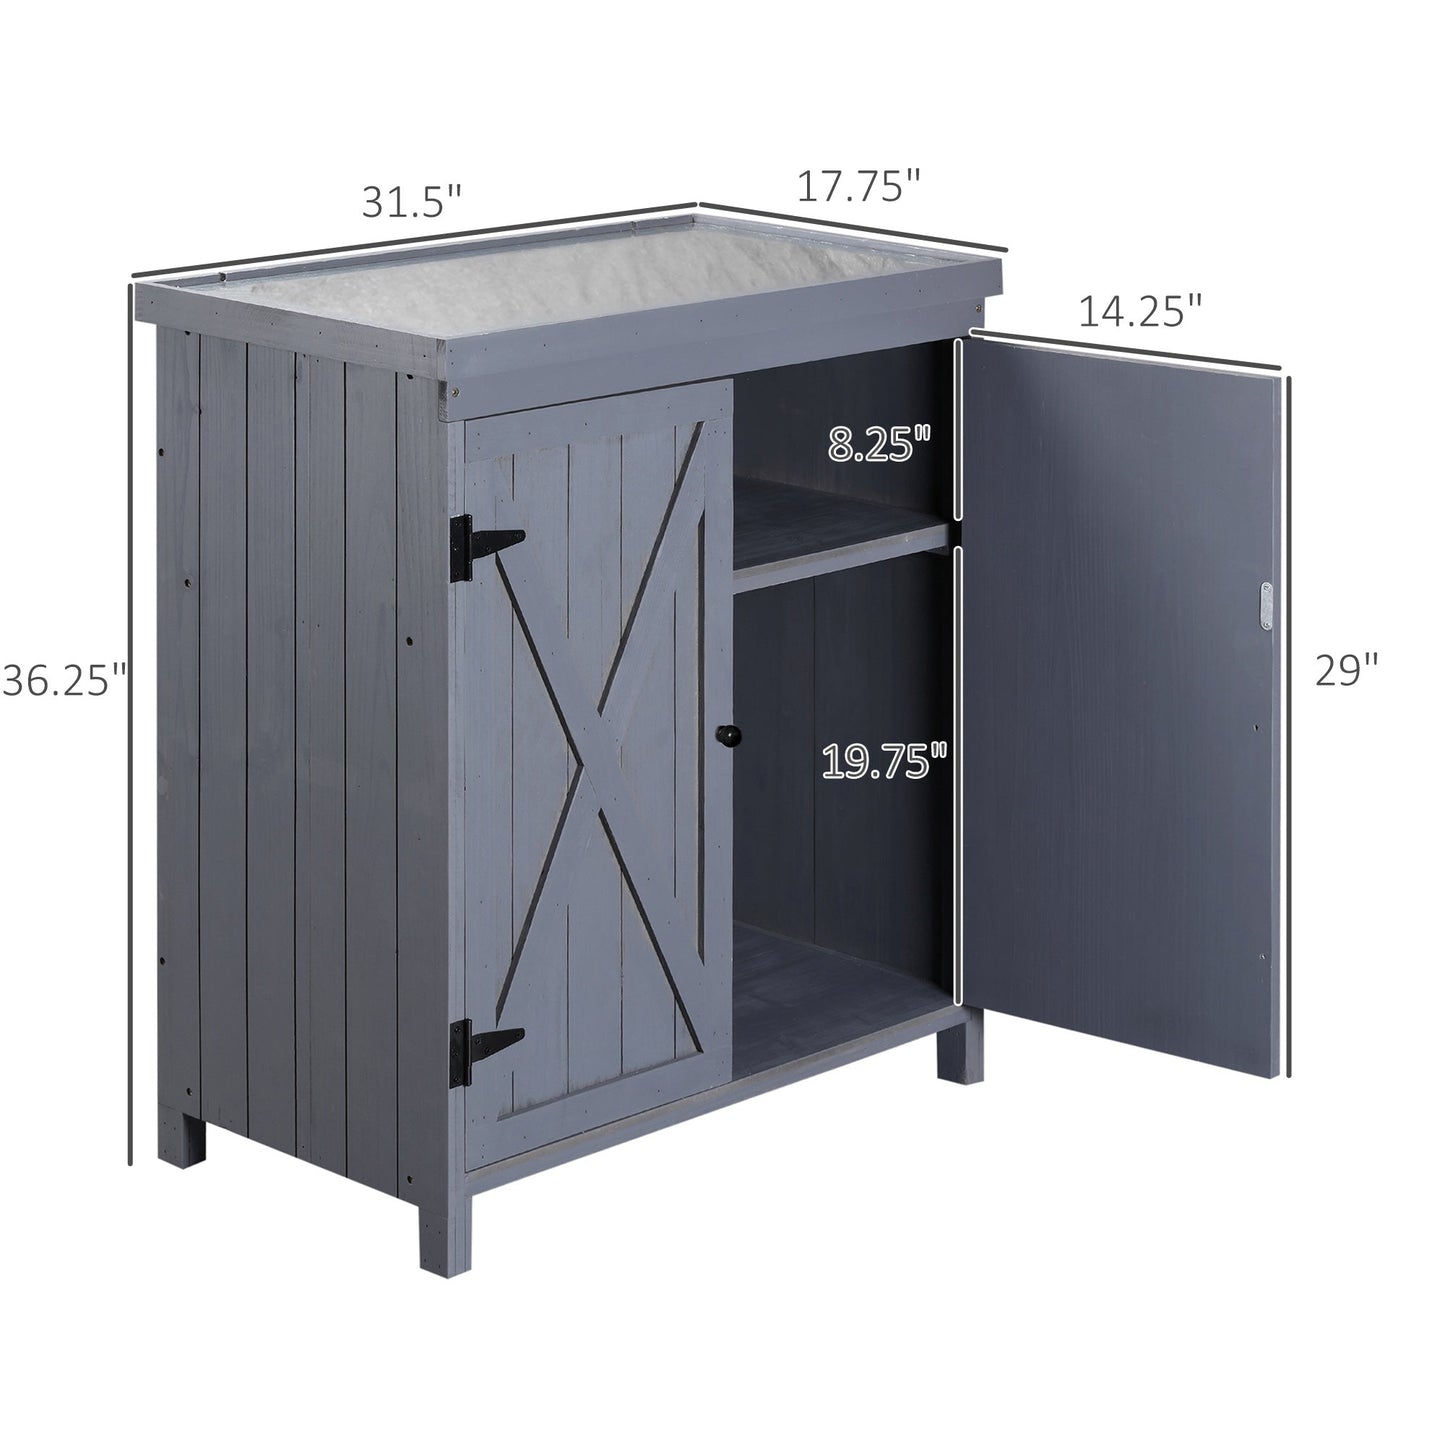 Outdoor and Garden-Garden Storage Cabinet, Outdoor Tool Shed with Galvanized Top and Two Shelves for Yard Tools or Pool Accessories, Grey - Outdoor Style Company